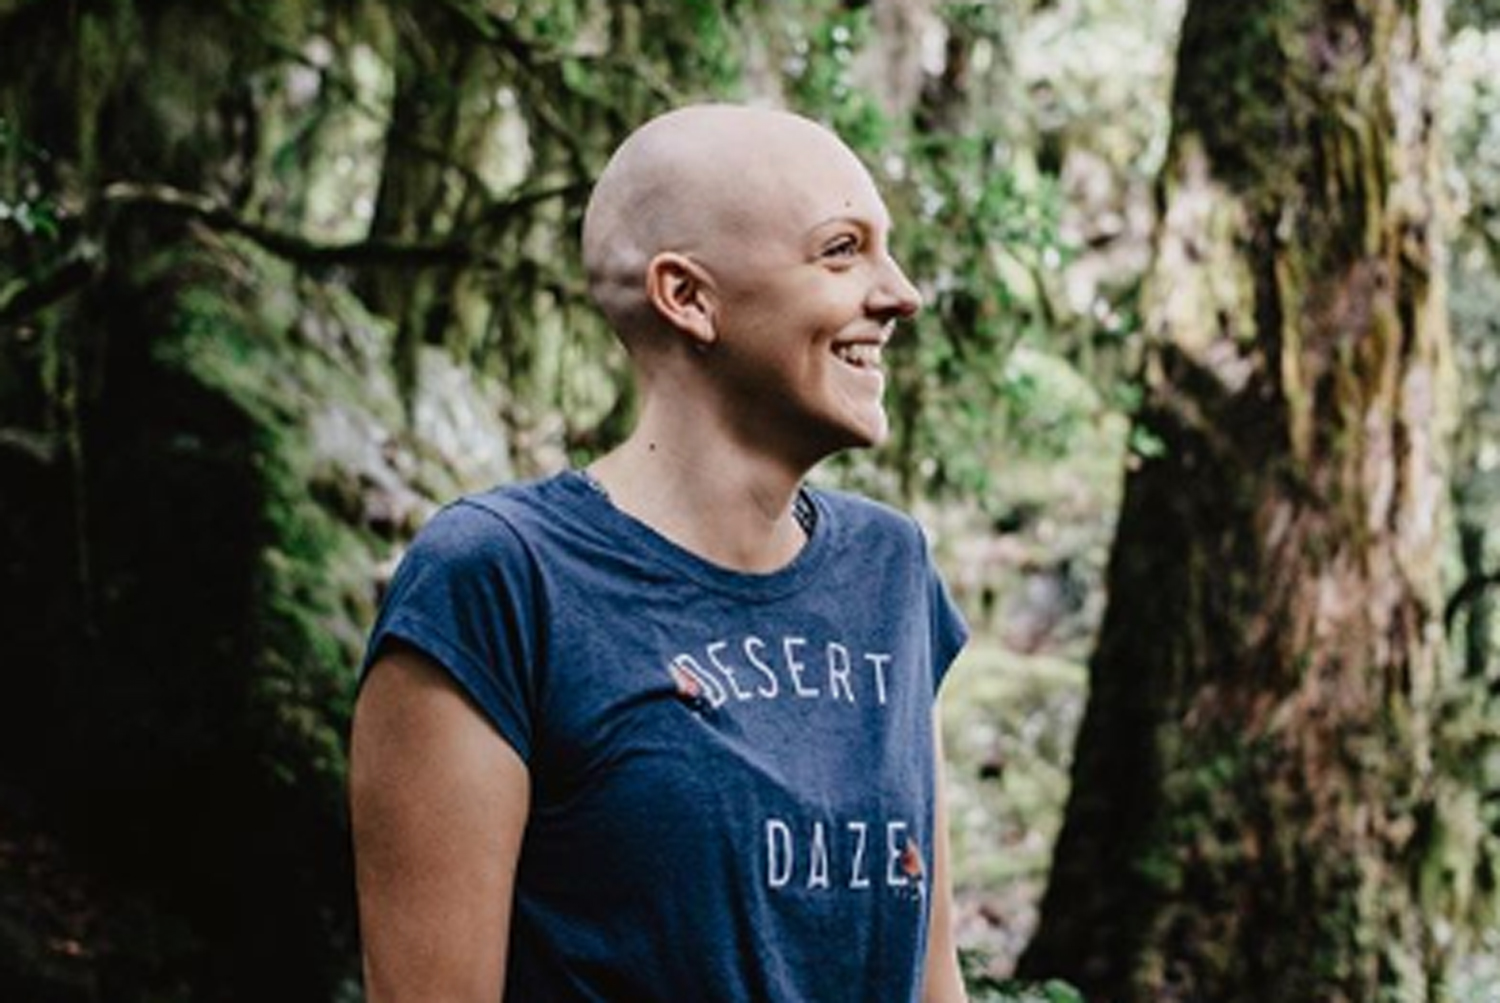 Rachel Vercoe Is Proving Her Breast Cancer Diagnosis Doesn’t Define Her